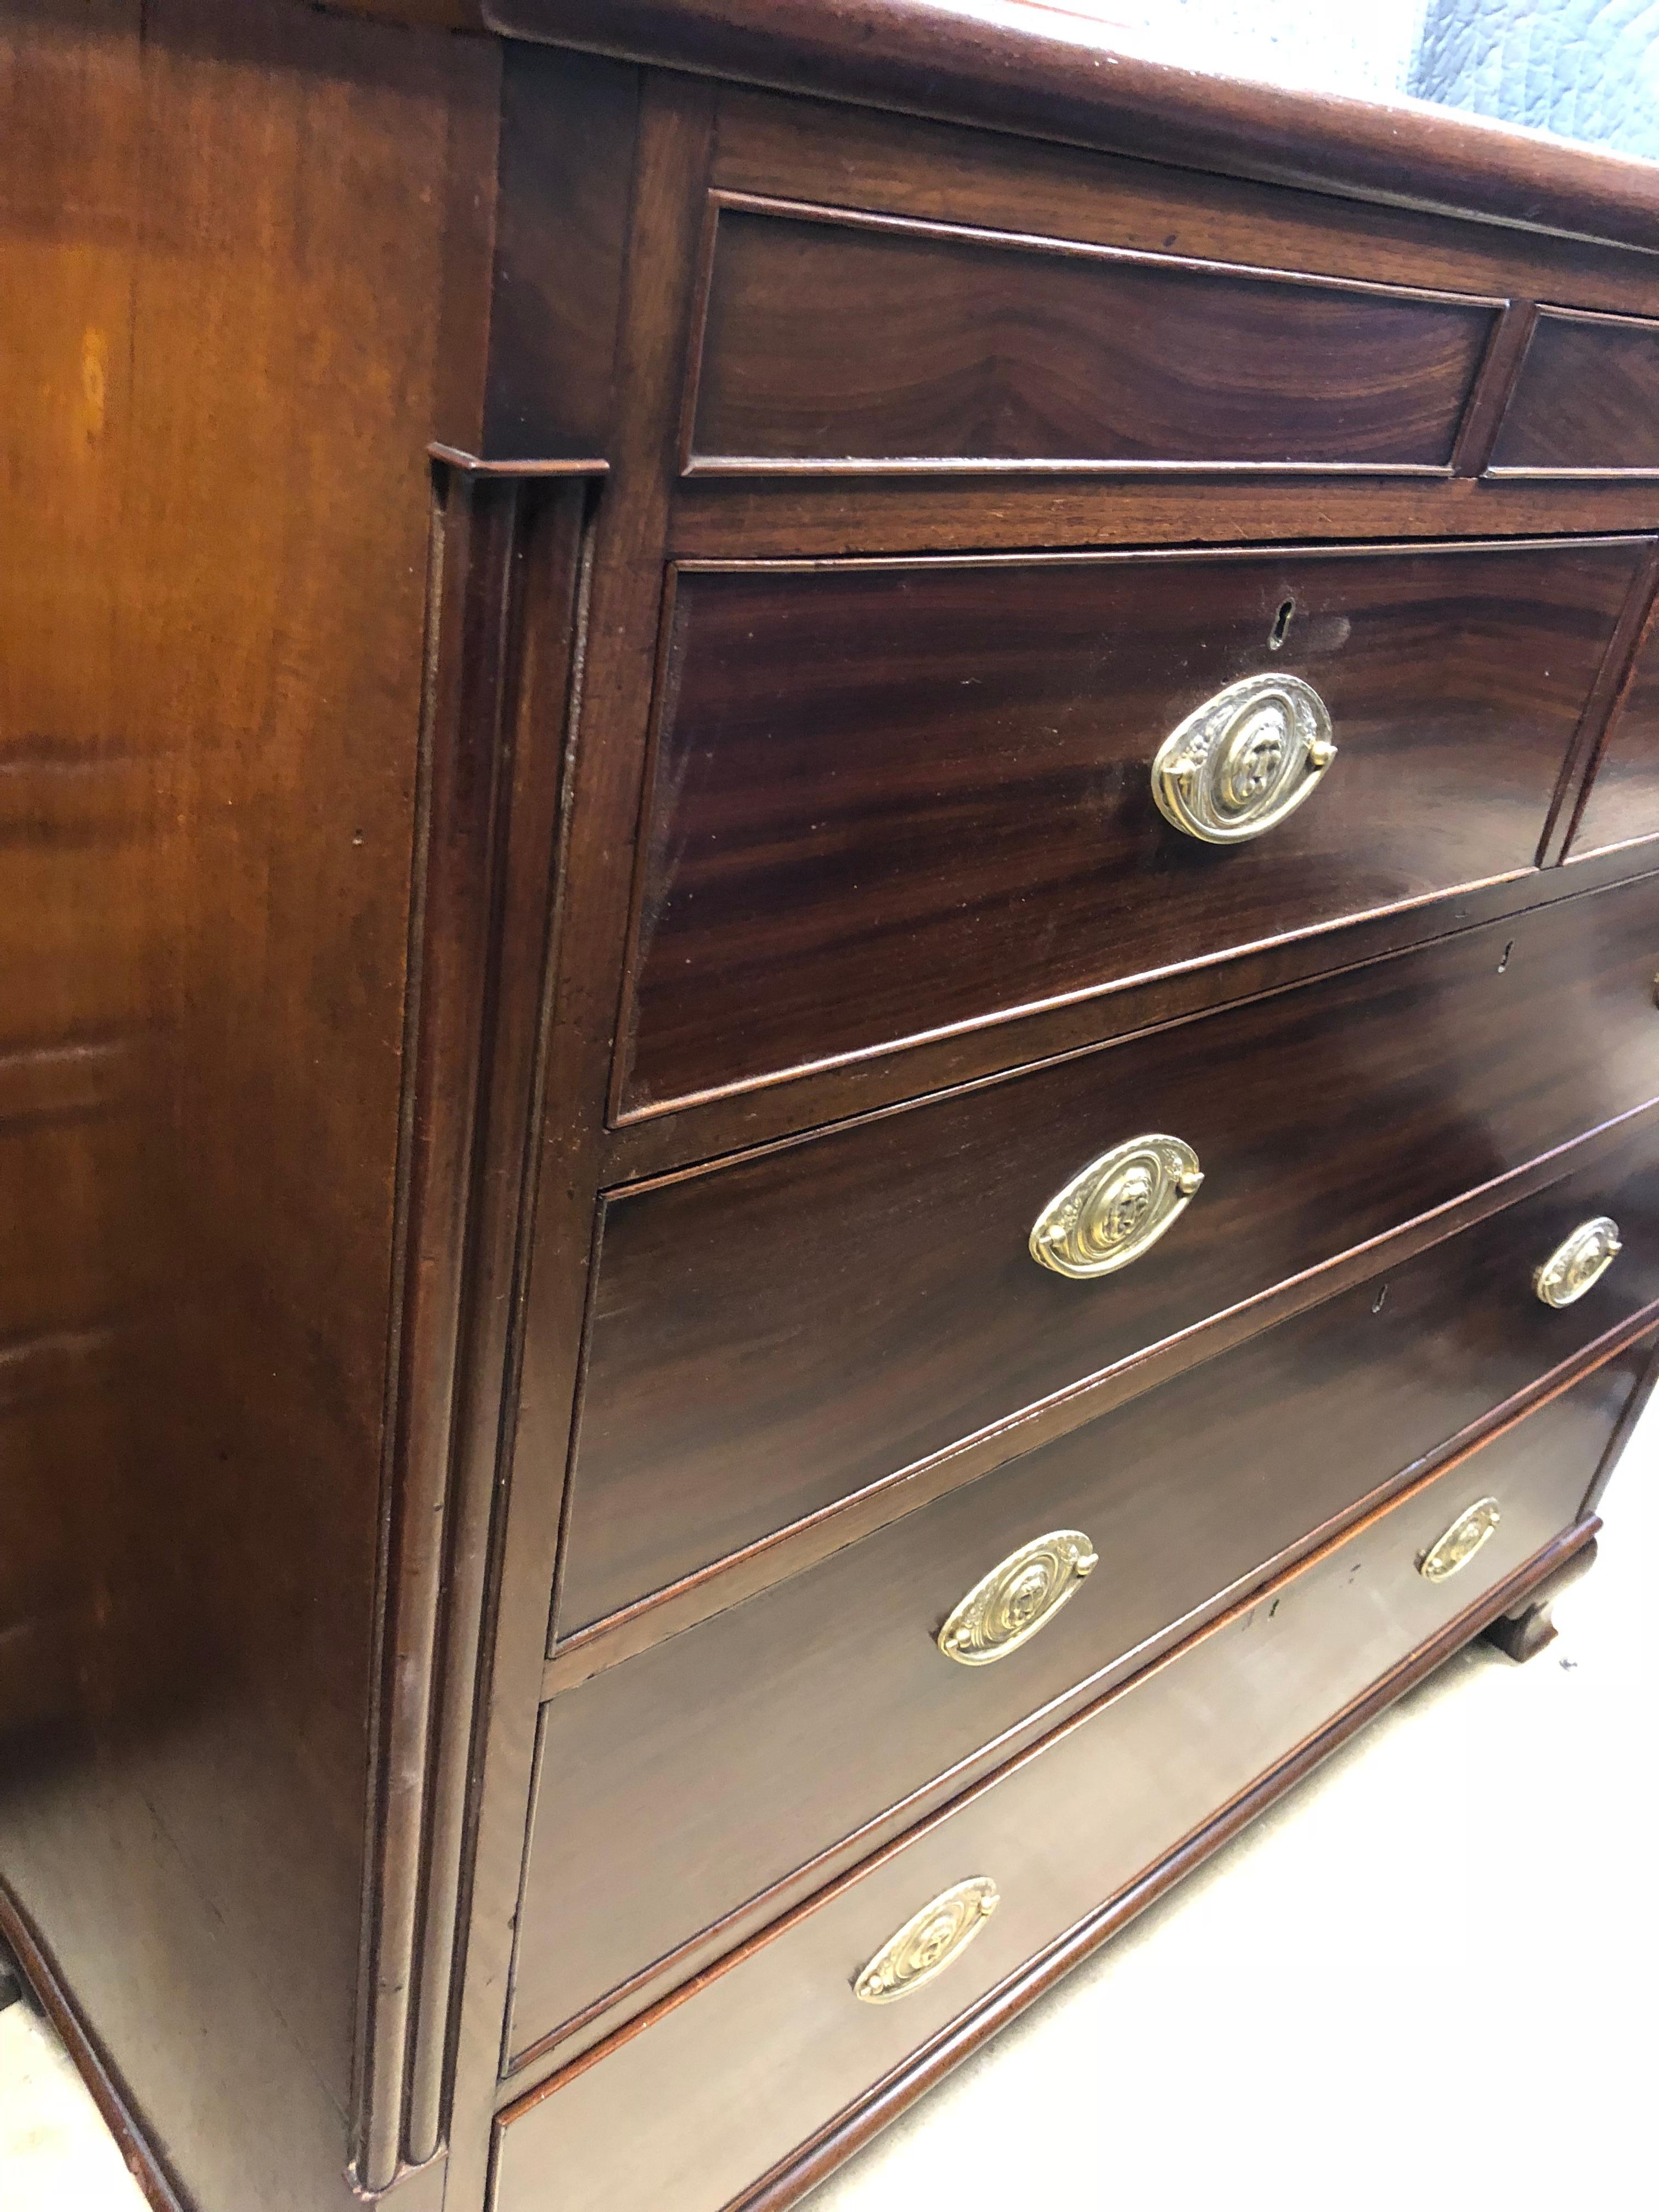 Large English Regency chest, circa 1820, mahogany with 3 small drawers across the top, only the middle one opens from inside and the other 2 are false, beautiful color, deep, heavy drawers, replacement solid brass pulls, nice shaped bracket feet,